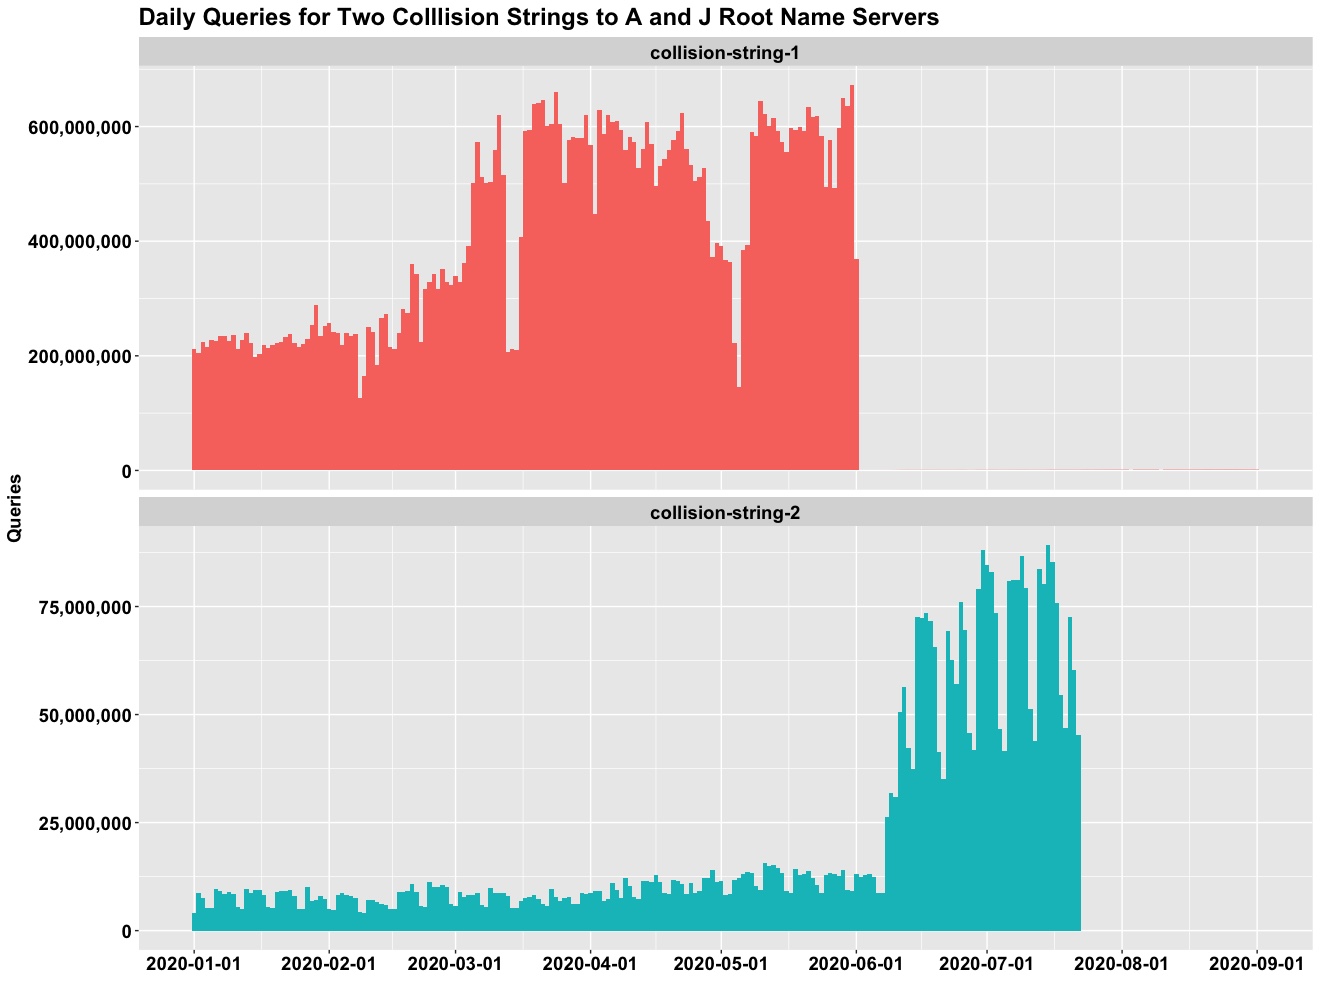 Figure 1. Daily queries for two collision strings to A and J root servers during a nine month period of time.